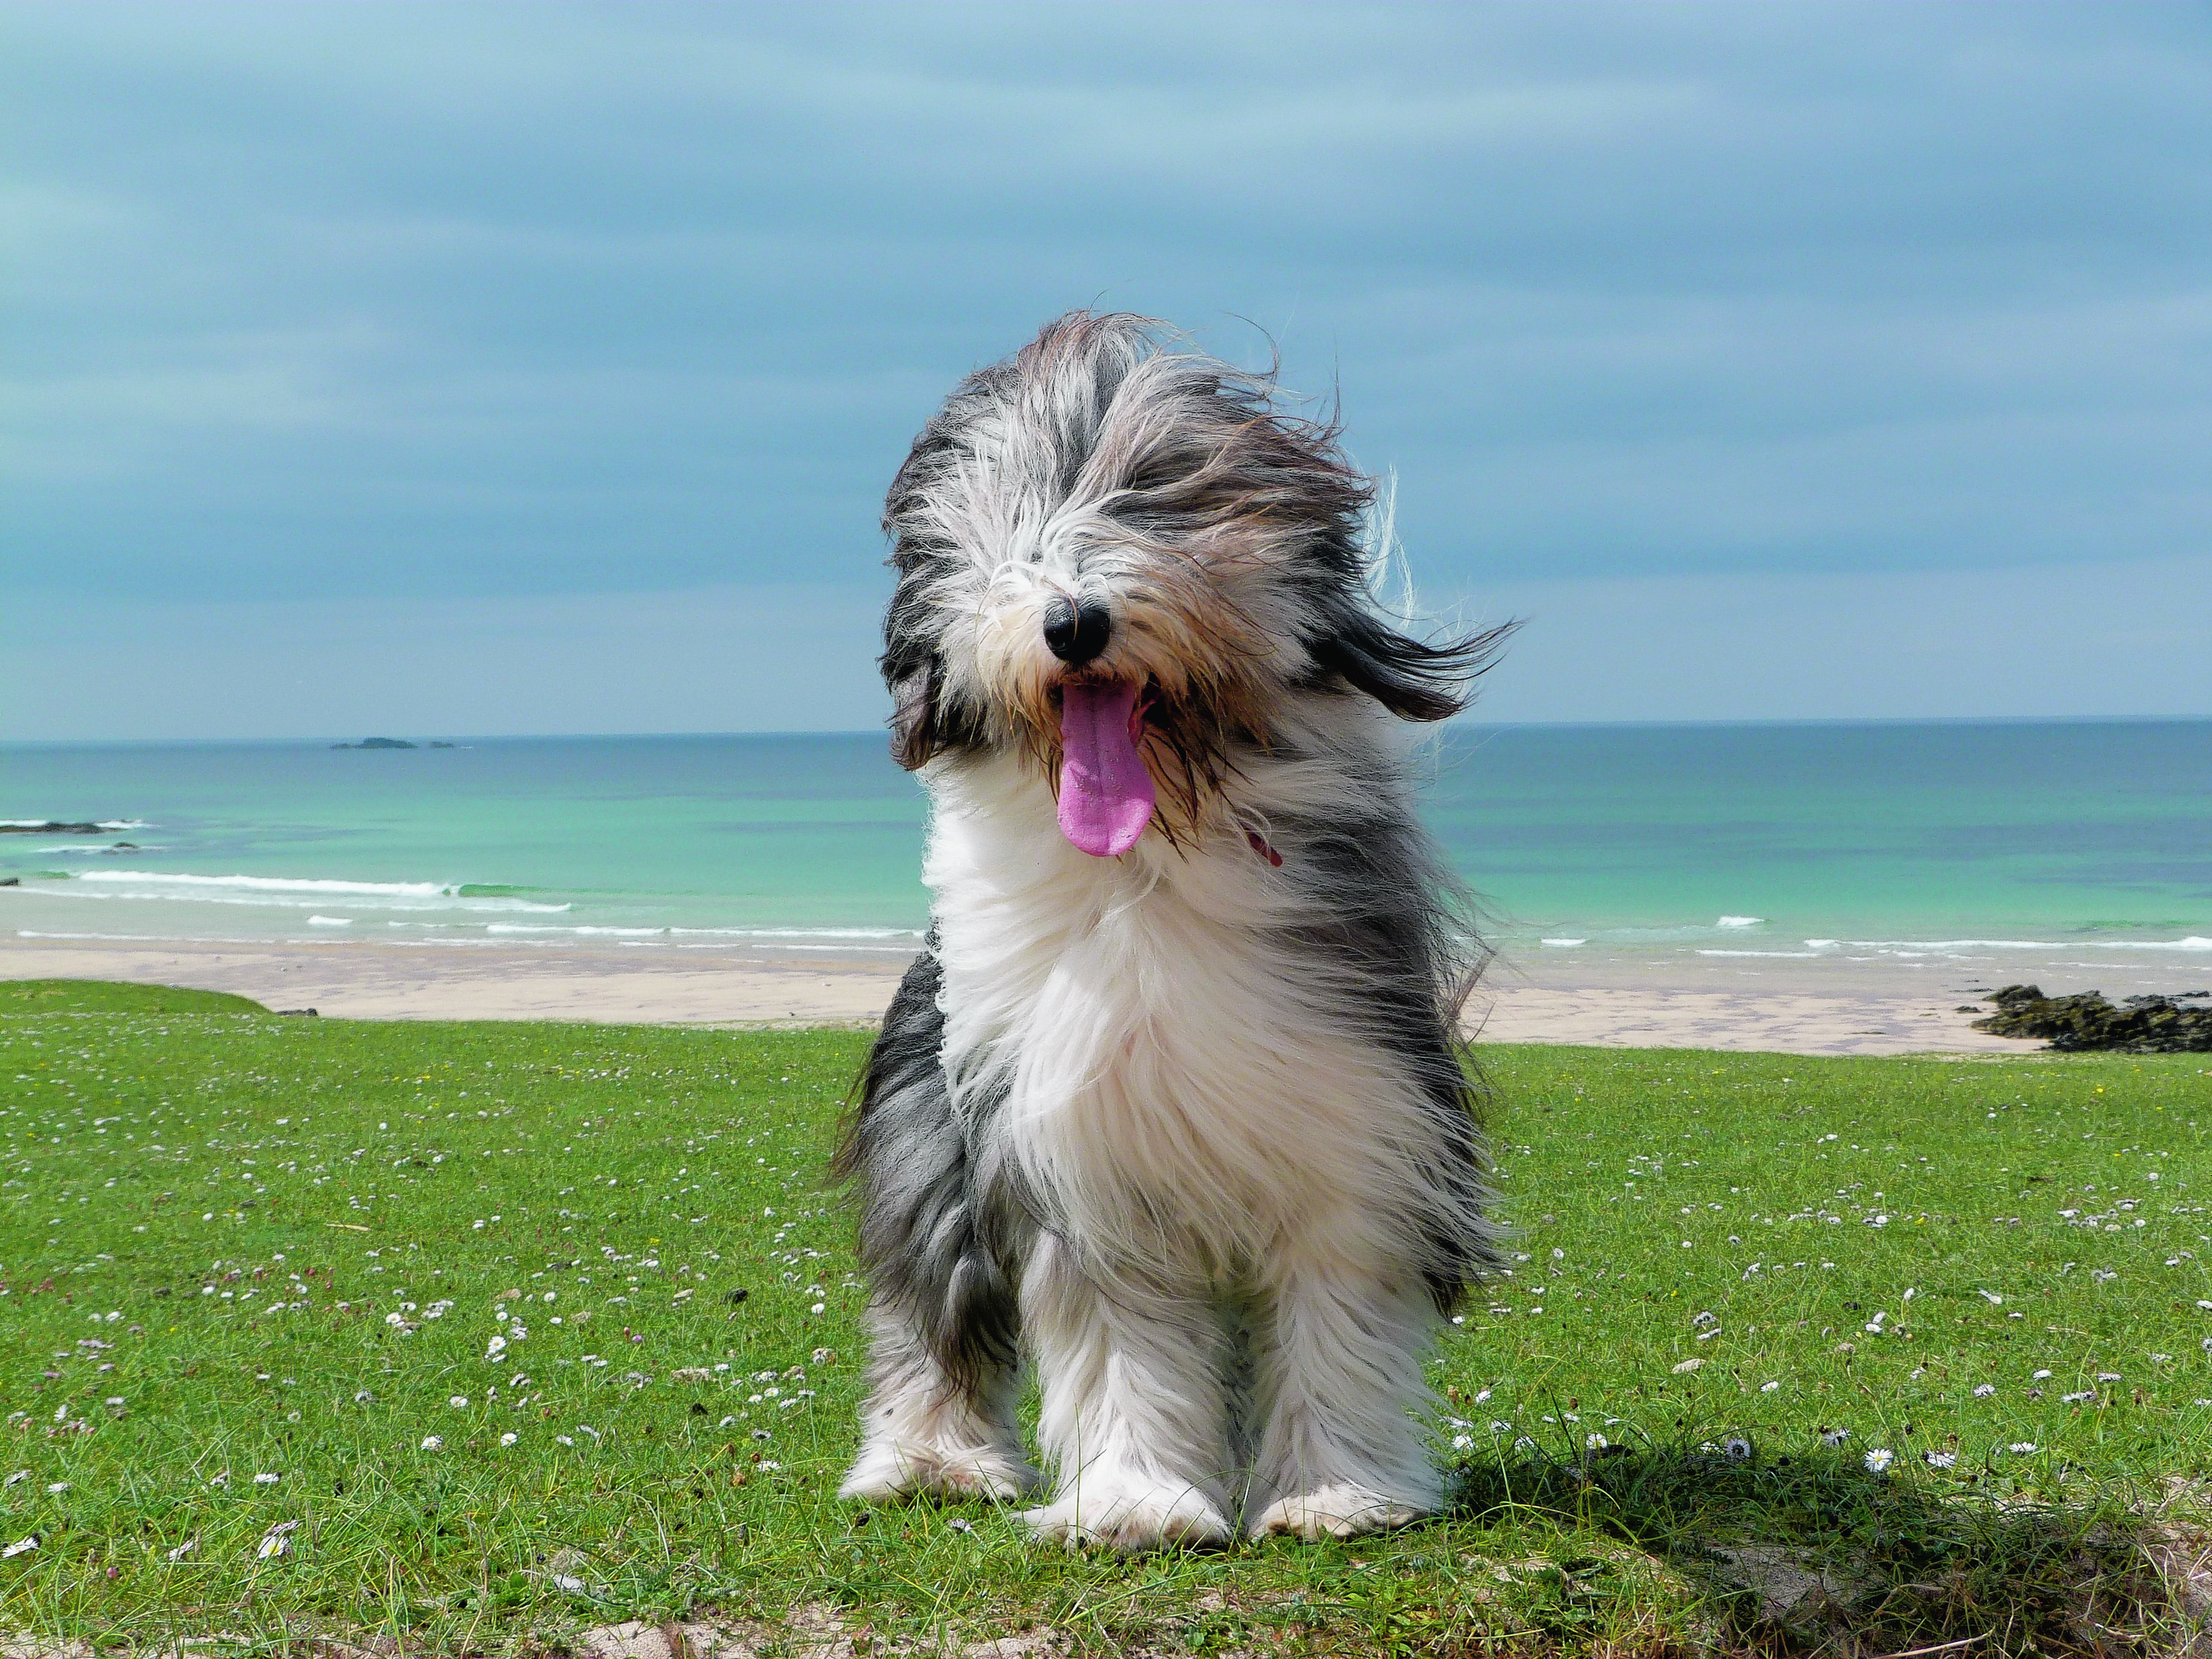 Meet our winner this week. Eighteen-month-old bearded collie, Lottie, lives with Samantha Hawkins in Port of Ness, Isle of Lewis.